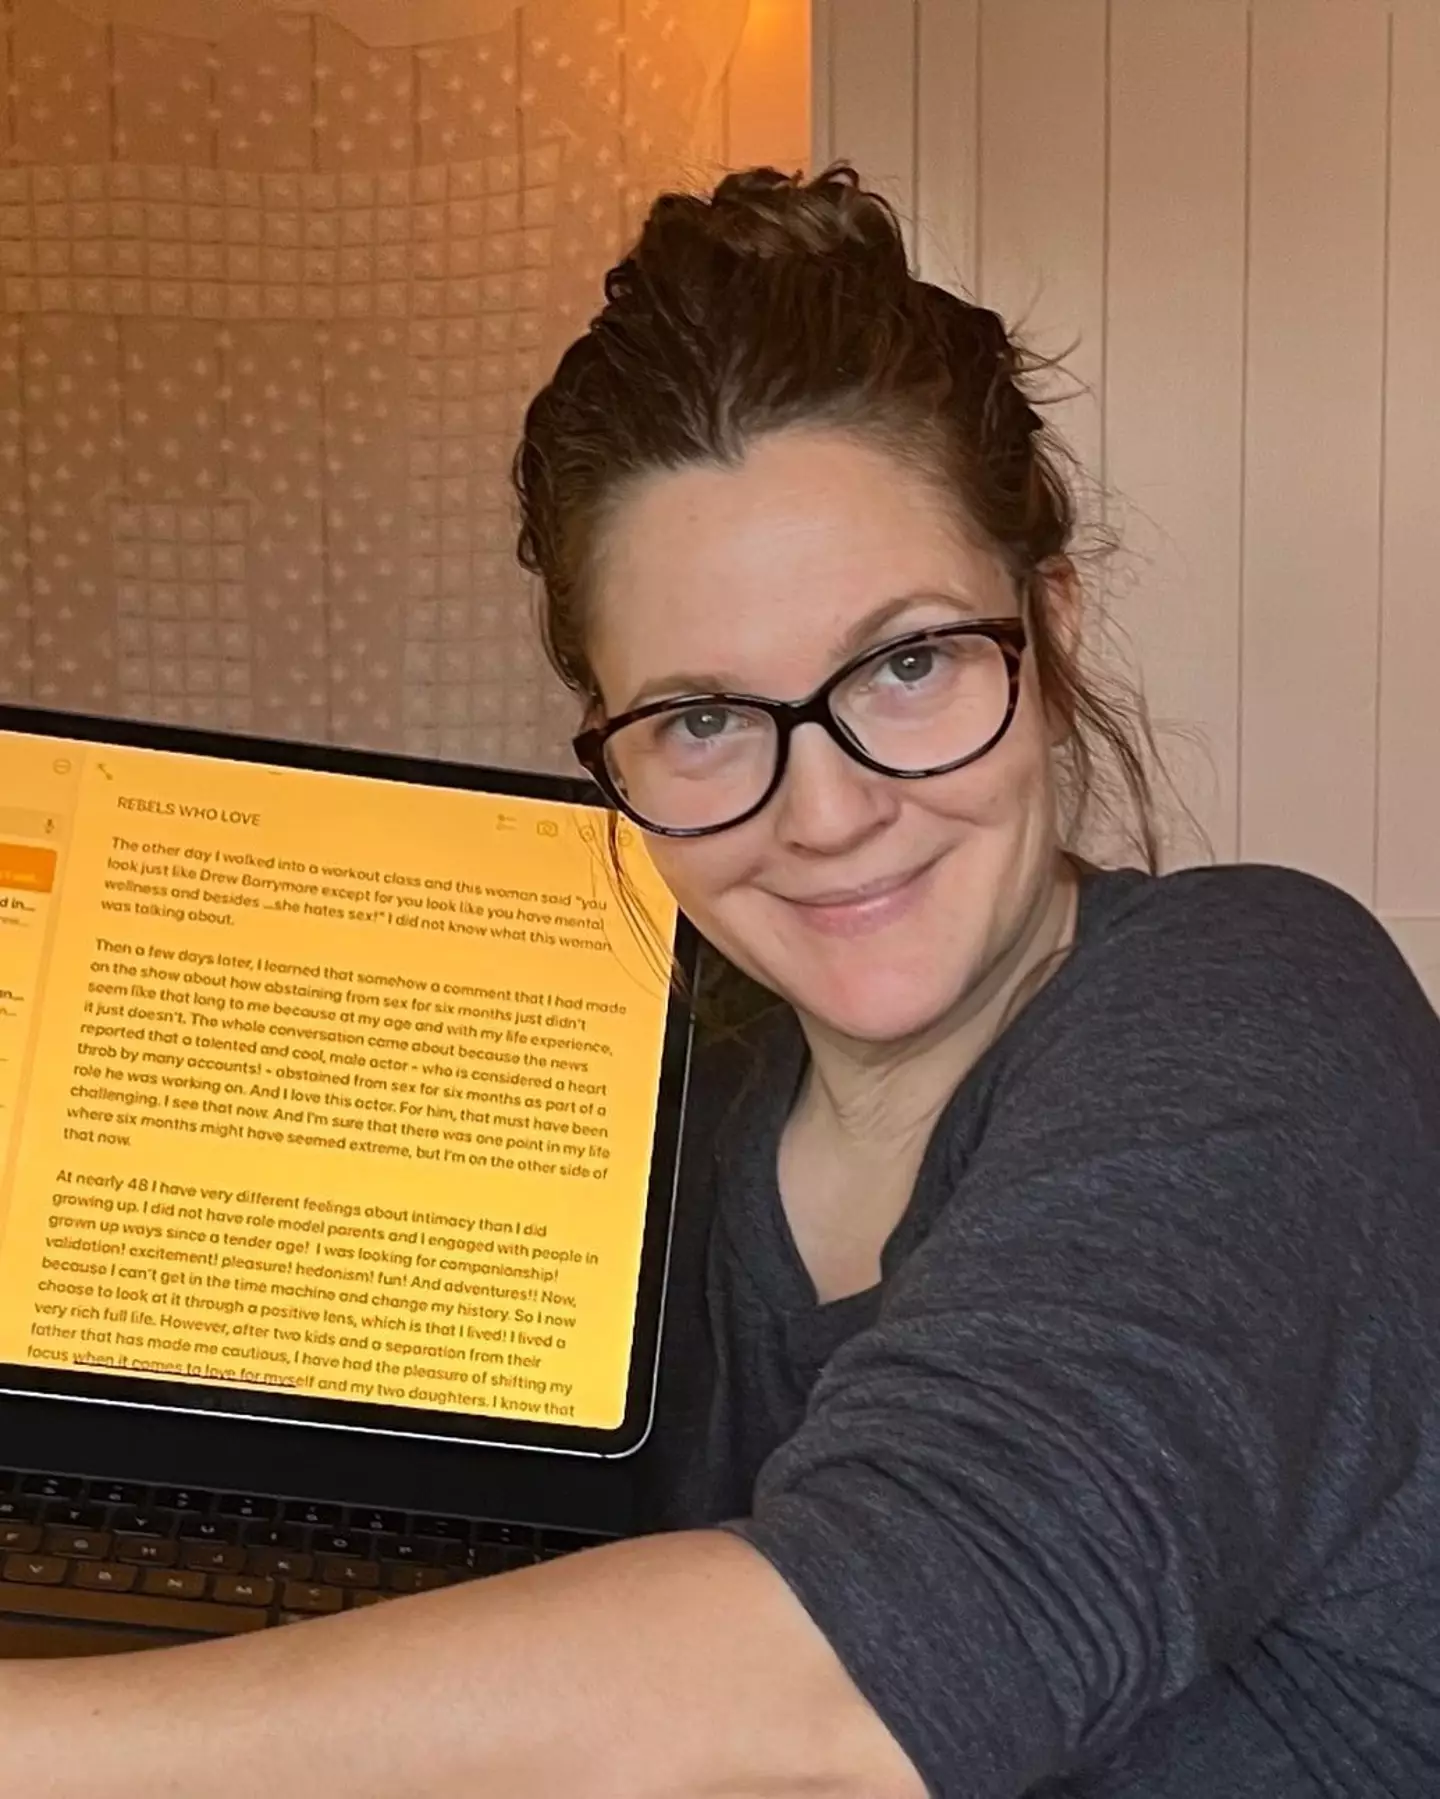 Barrymore shares essays about life on her blog.